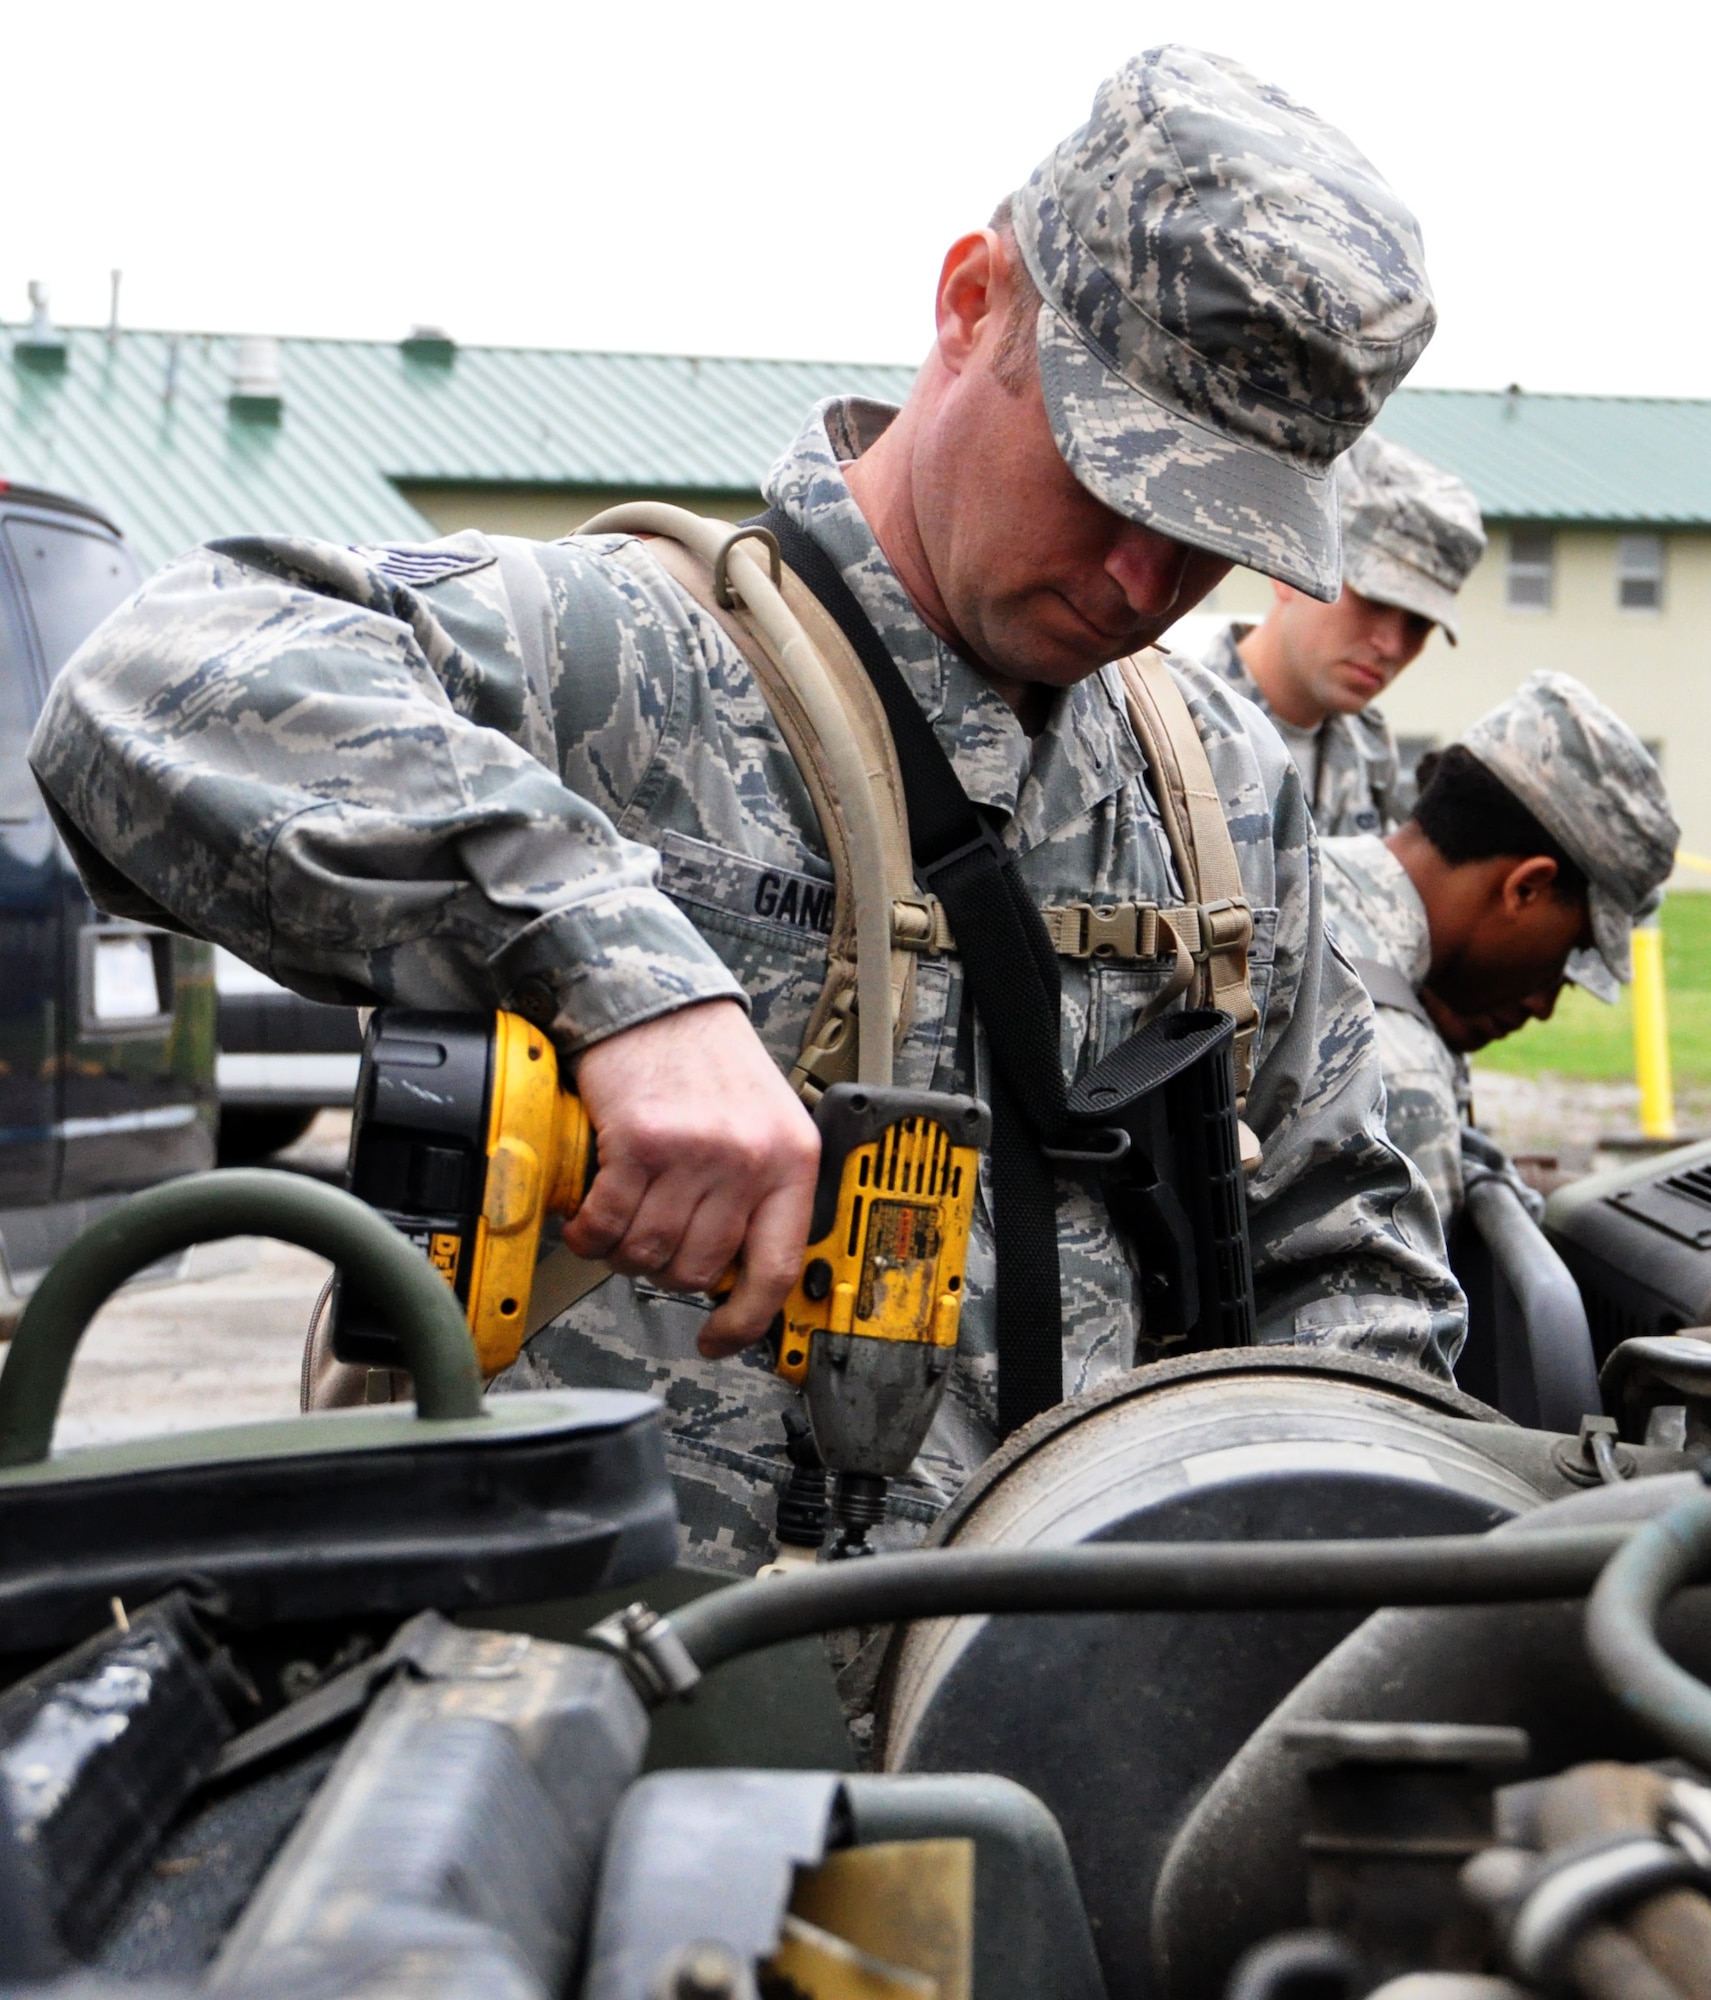 Tech. Sgt. Jason Gandee, 931st Civil Engineer Squadron, preps a High Mobility Multipurpose Wheeled Vehicle (HMMWV) for a convoy operations training exercise at Camp Gruber Training Center, Okla., April 15, 2015.  More than 80 members of the 931 CES and 931st Security Forces Squadron participated in ten days of combat skills training at Camp Gruber, which included land navigation, weapons training, tactical movements, convoy operations, base defense, room clearing procedures, foot patrols, military operations on urban terrain (MOUT) and combat lifesaving.  (U.S. Air Force photo by Capt. Zach Anderson)
